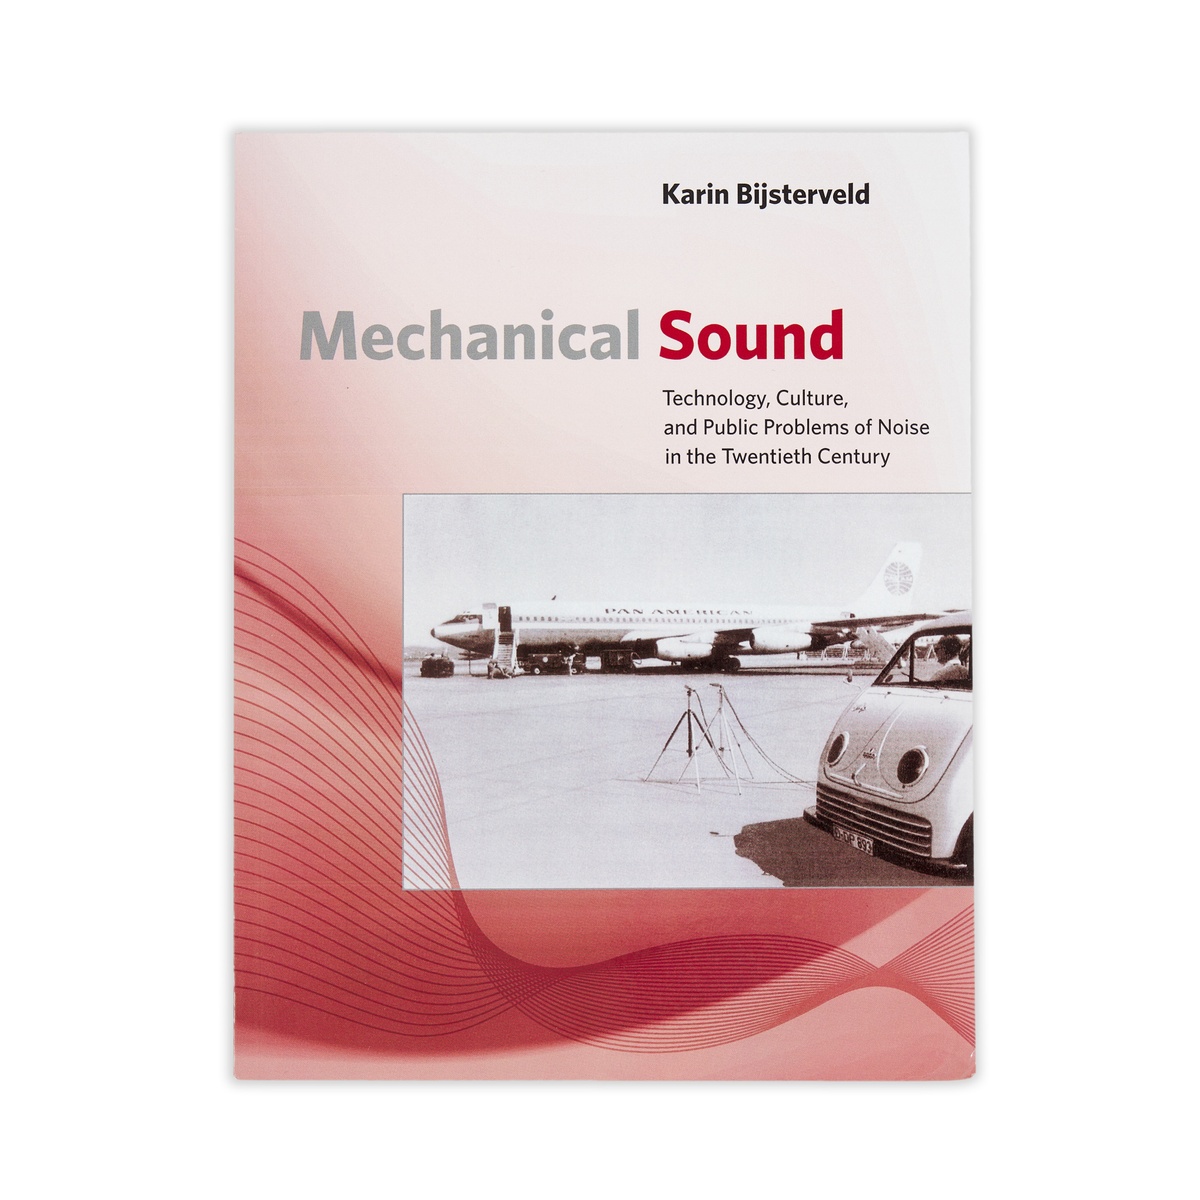 Photograph of the cover of Karin Bijsterveld's book 'Mechanical Sound: Technology, Culture, and Public Problems of Noise in the Twentieth Century'.
